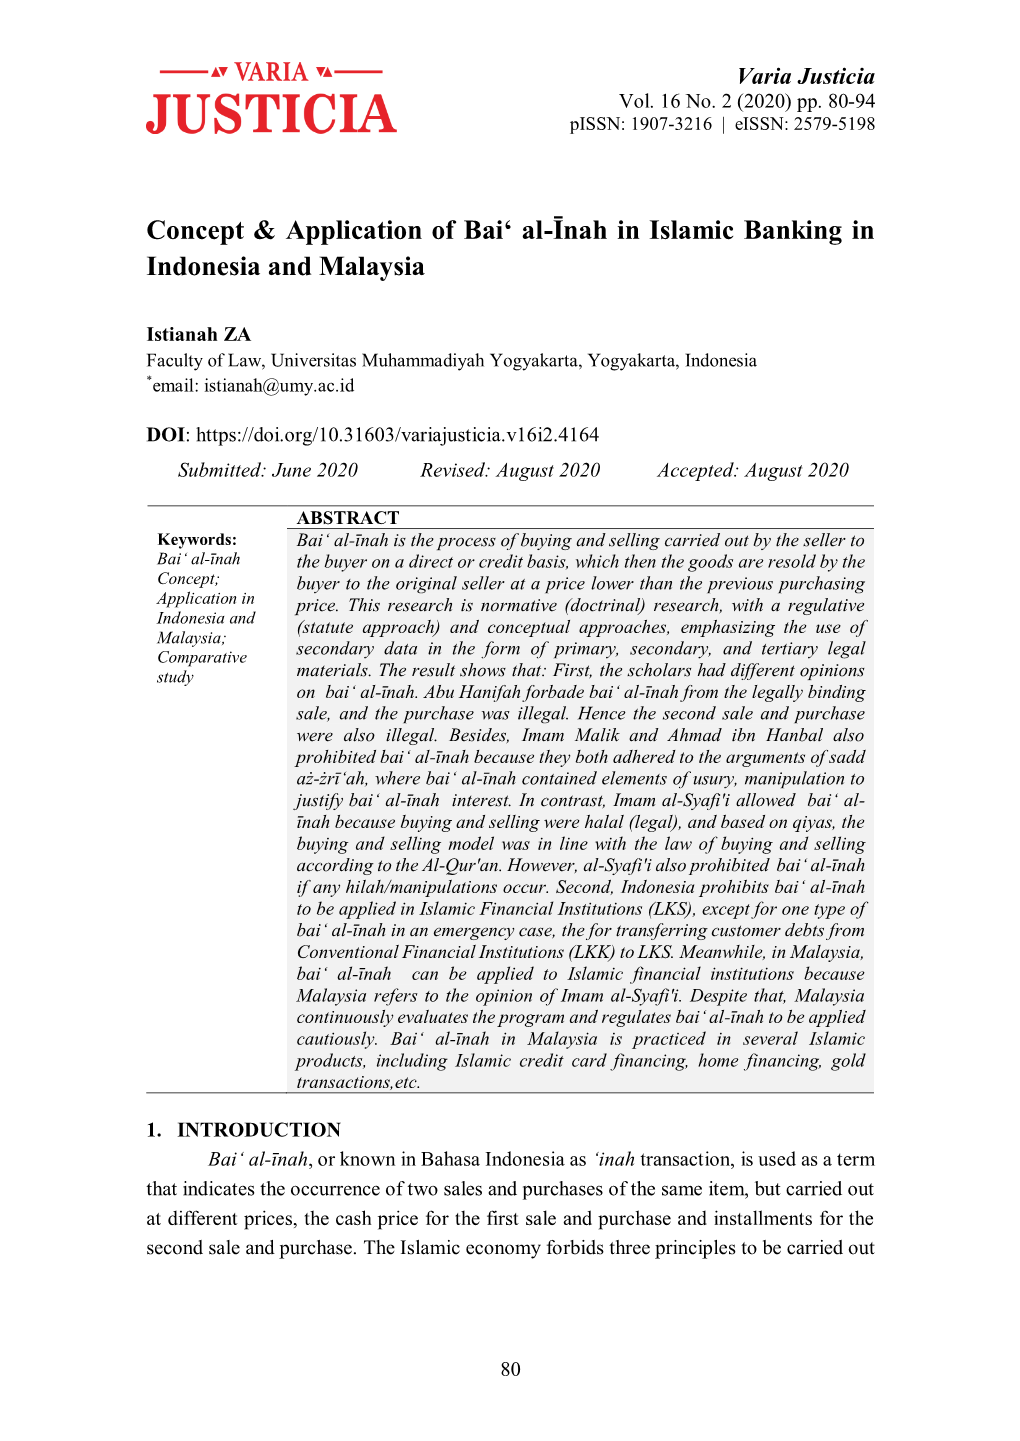 Concept & Application of Baiʻ Al-Īnah in Islamic Banking in Indonesia and Malaysia